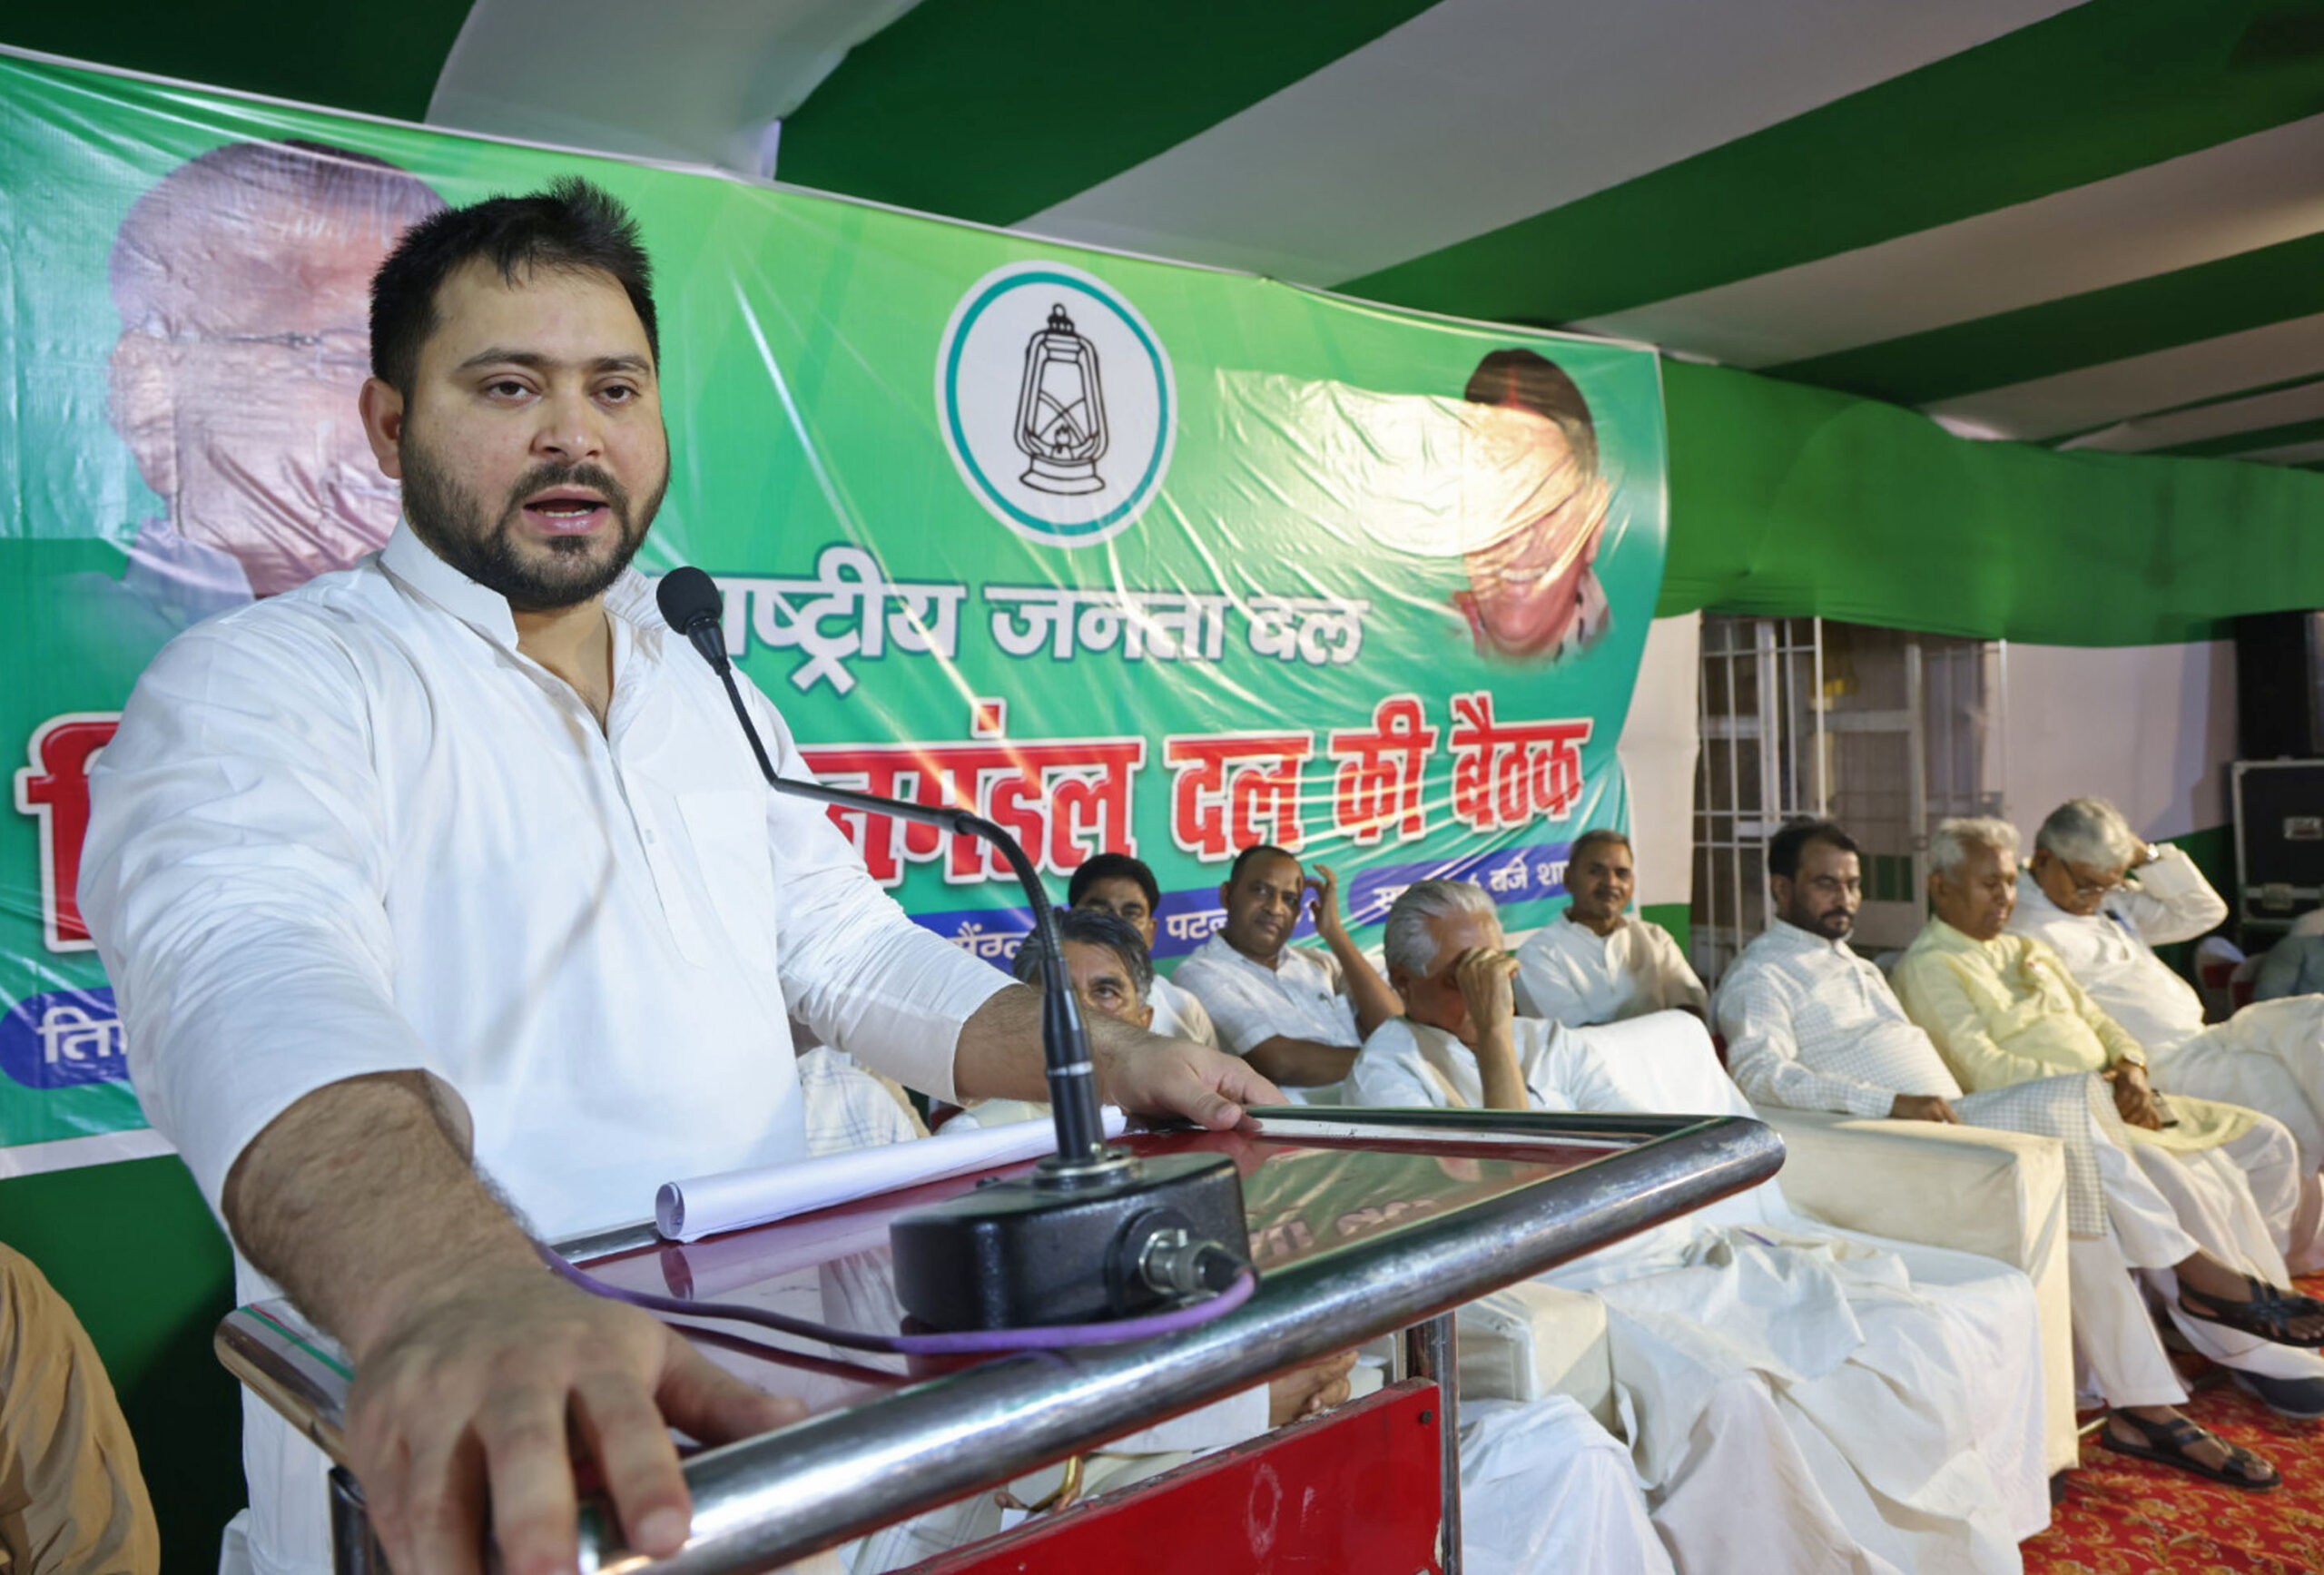 Tejashwi Yadav ahead of Mumbai meeting : ‘INDIA’ bloc came together to fight “communal forces”